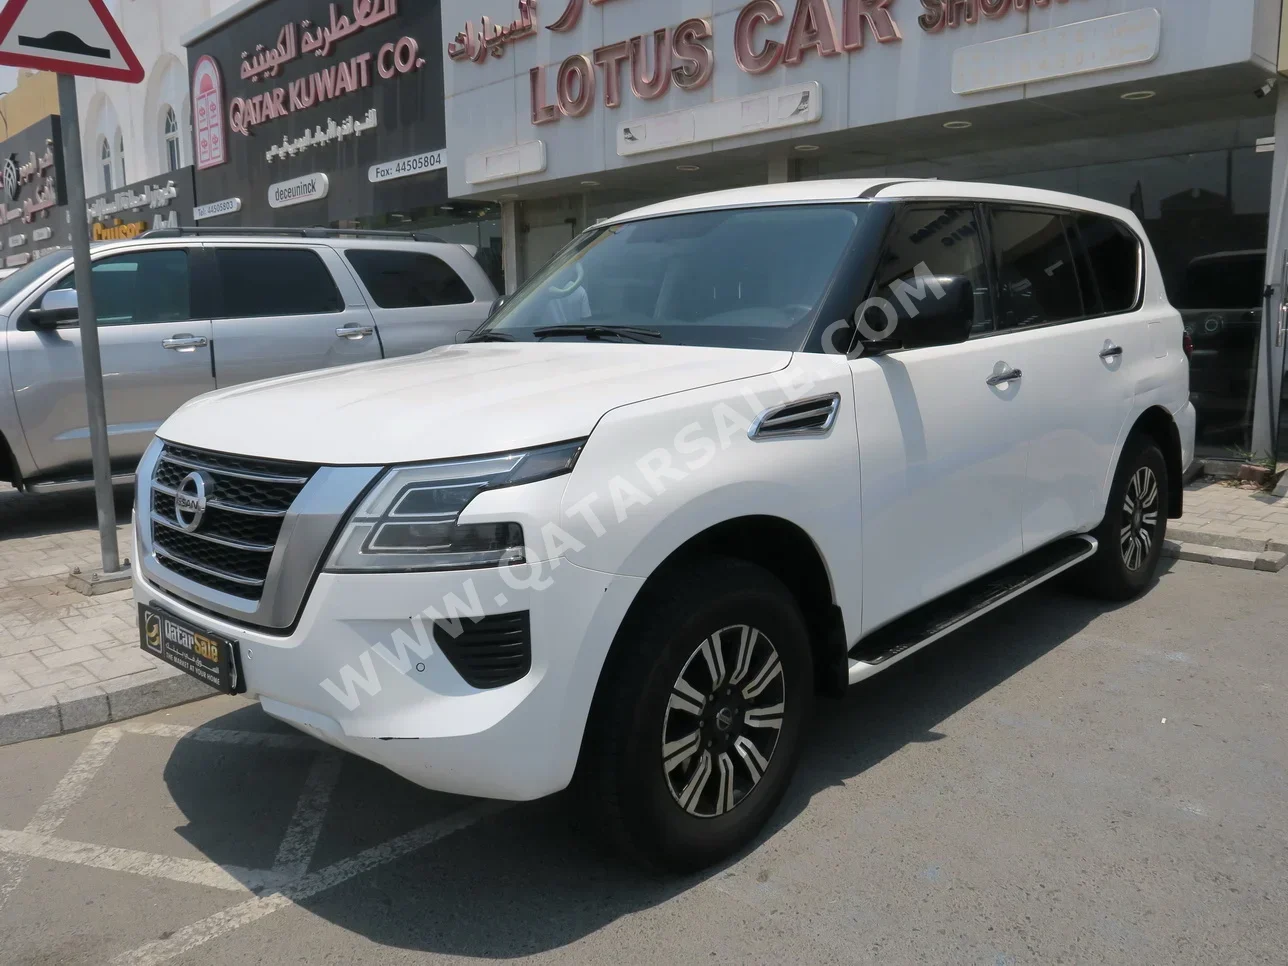 Nissan  Patrol  XE  2020  Automatic  165,000 Km  6 Cylinder  Four Wheel Drive (4WD)  SUV  White